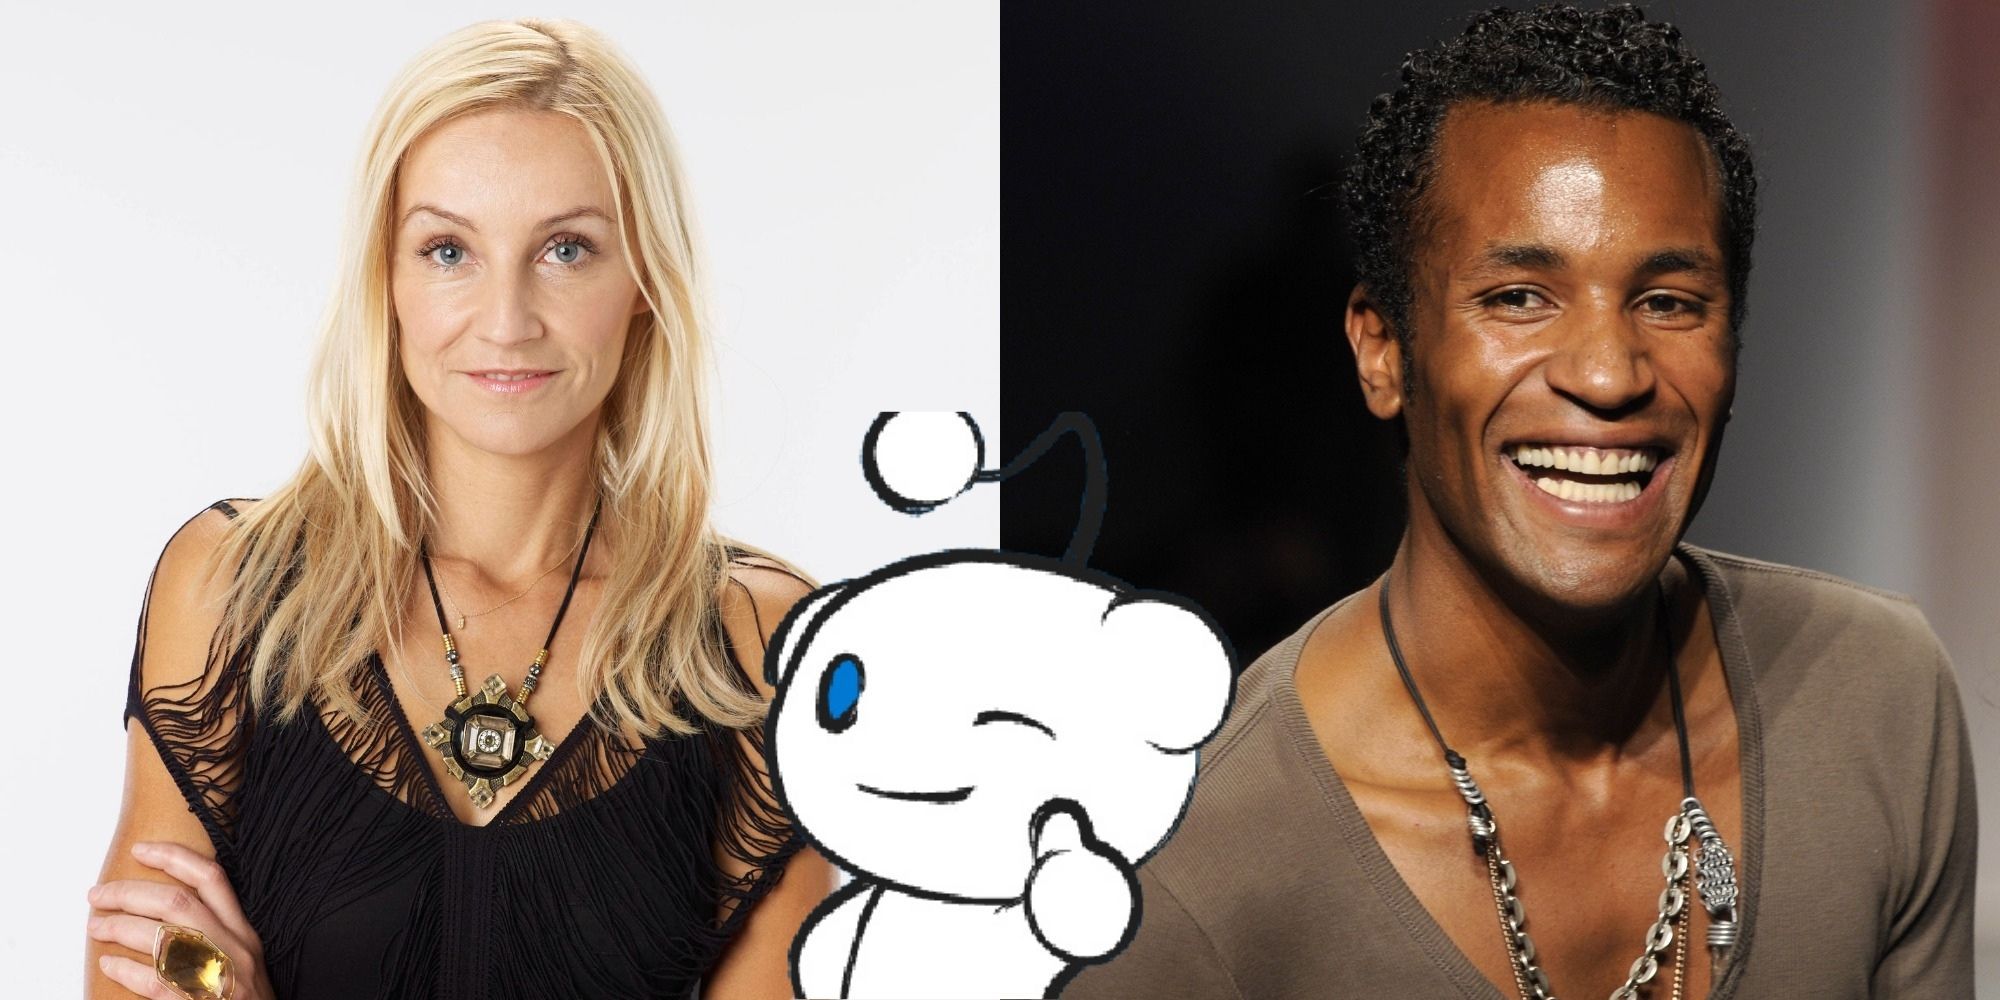 Split image showing Uli and Jerell from Project Runway, and Snoo from Reddit doing a thumbs up